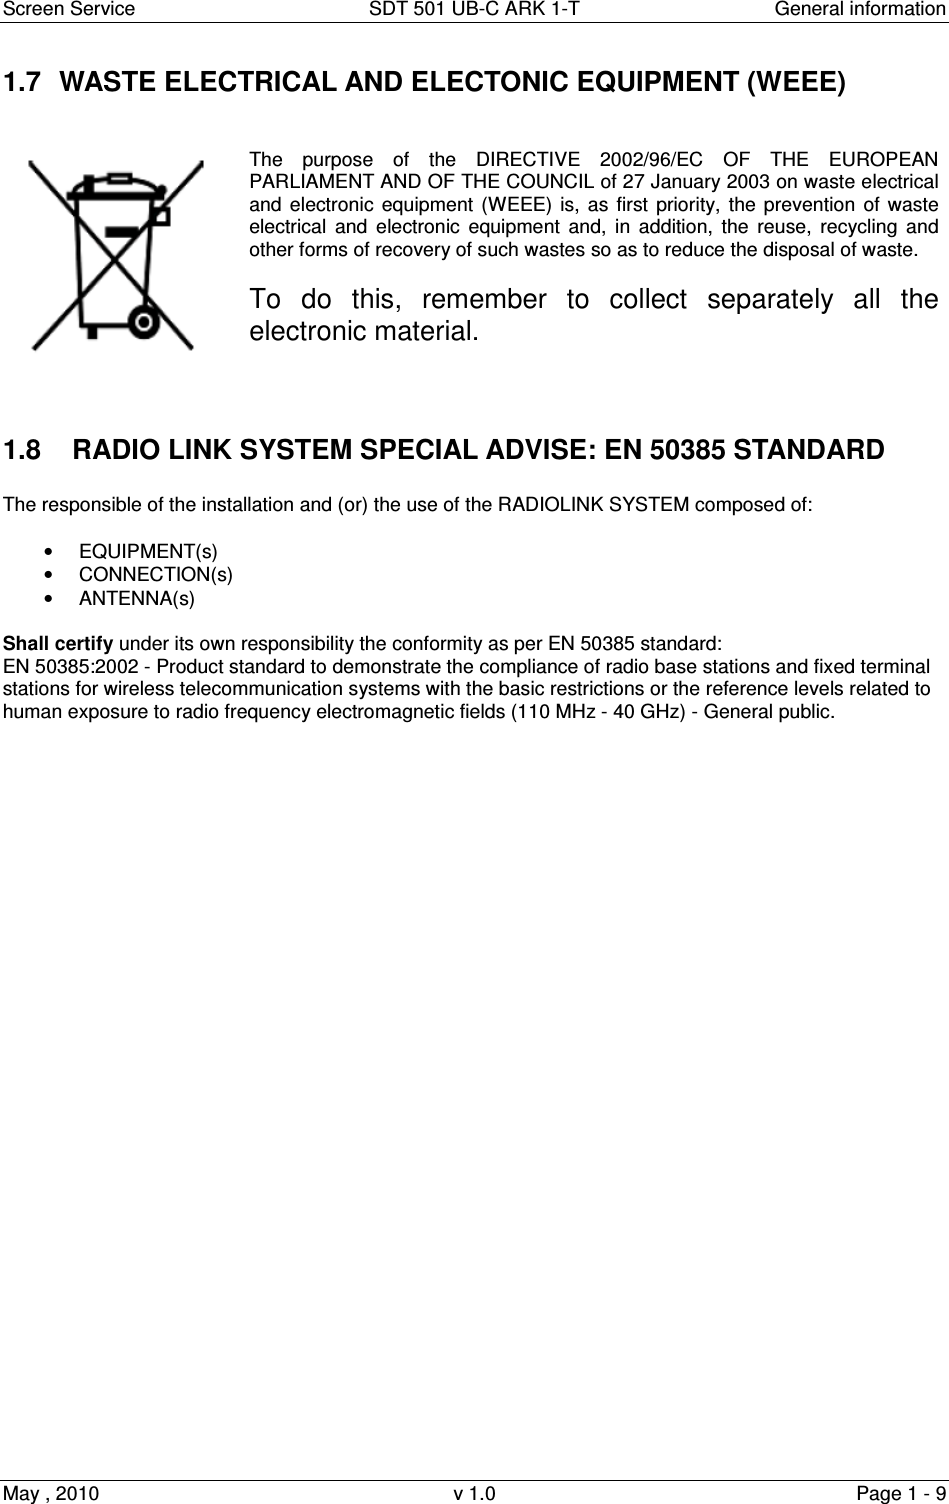 Screen Service  SDT 501 UB-C ARK 1-T  General information May , 2010  v 1.0  Page 1 - 9 1.7  WASTE ELECTRICAL AND ELECTONIC EQUIPMENT (WEEE)     The  purpose  of  the  DIRECTIVE  2002/96/EC  OF  THE  EUROPEAN PARLIAMENT AND OF THE COUNCIL of 27 January 2003 on waste electrical and electronic equipment  (WEEE) is, as  first priority,  the  prevention  of  waste electrical  and electronic  equipment  and,  in  addition,  the  reuse,  recycling  and other forms of recovery of such wastes so as to reduce the disposal of waste.   To  do  this,  remember  to  collect  separately  all  the electronic material.   1.8    RADIO LINK SYSTEM SPECIAL ADVISE: EN 50385 STANDARD  The responsible of the installation and (or) the use of the RADIOLINK SYSTEM composed of:   •  EQUIPMENT(s) •  CONNECTION(s) •  ANTENNA(s)  Shall certify under its own responsibility the conformity as per EN 50385 standard:                                                               EN 50385:2002 - Product standard to demonstrate the compliance of radio base stations and fixed terminal stations for wireless telecommunication systems with the basic restrictions or the reference levels related to human exposure to radio frequency electromagnetic fields (110 MHz - 40 GHz) - General public. 